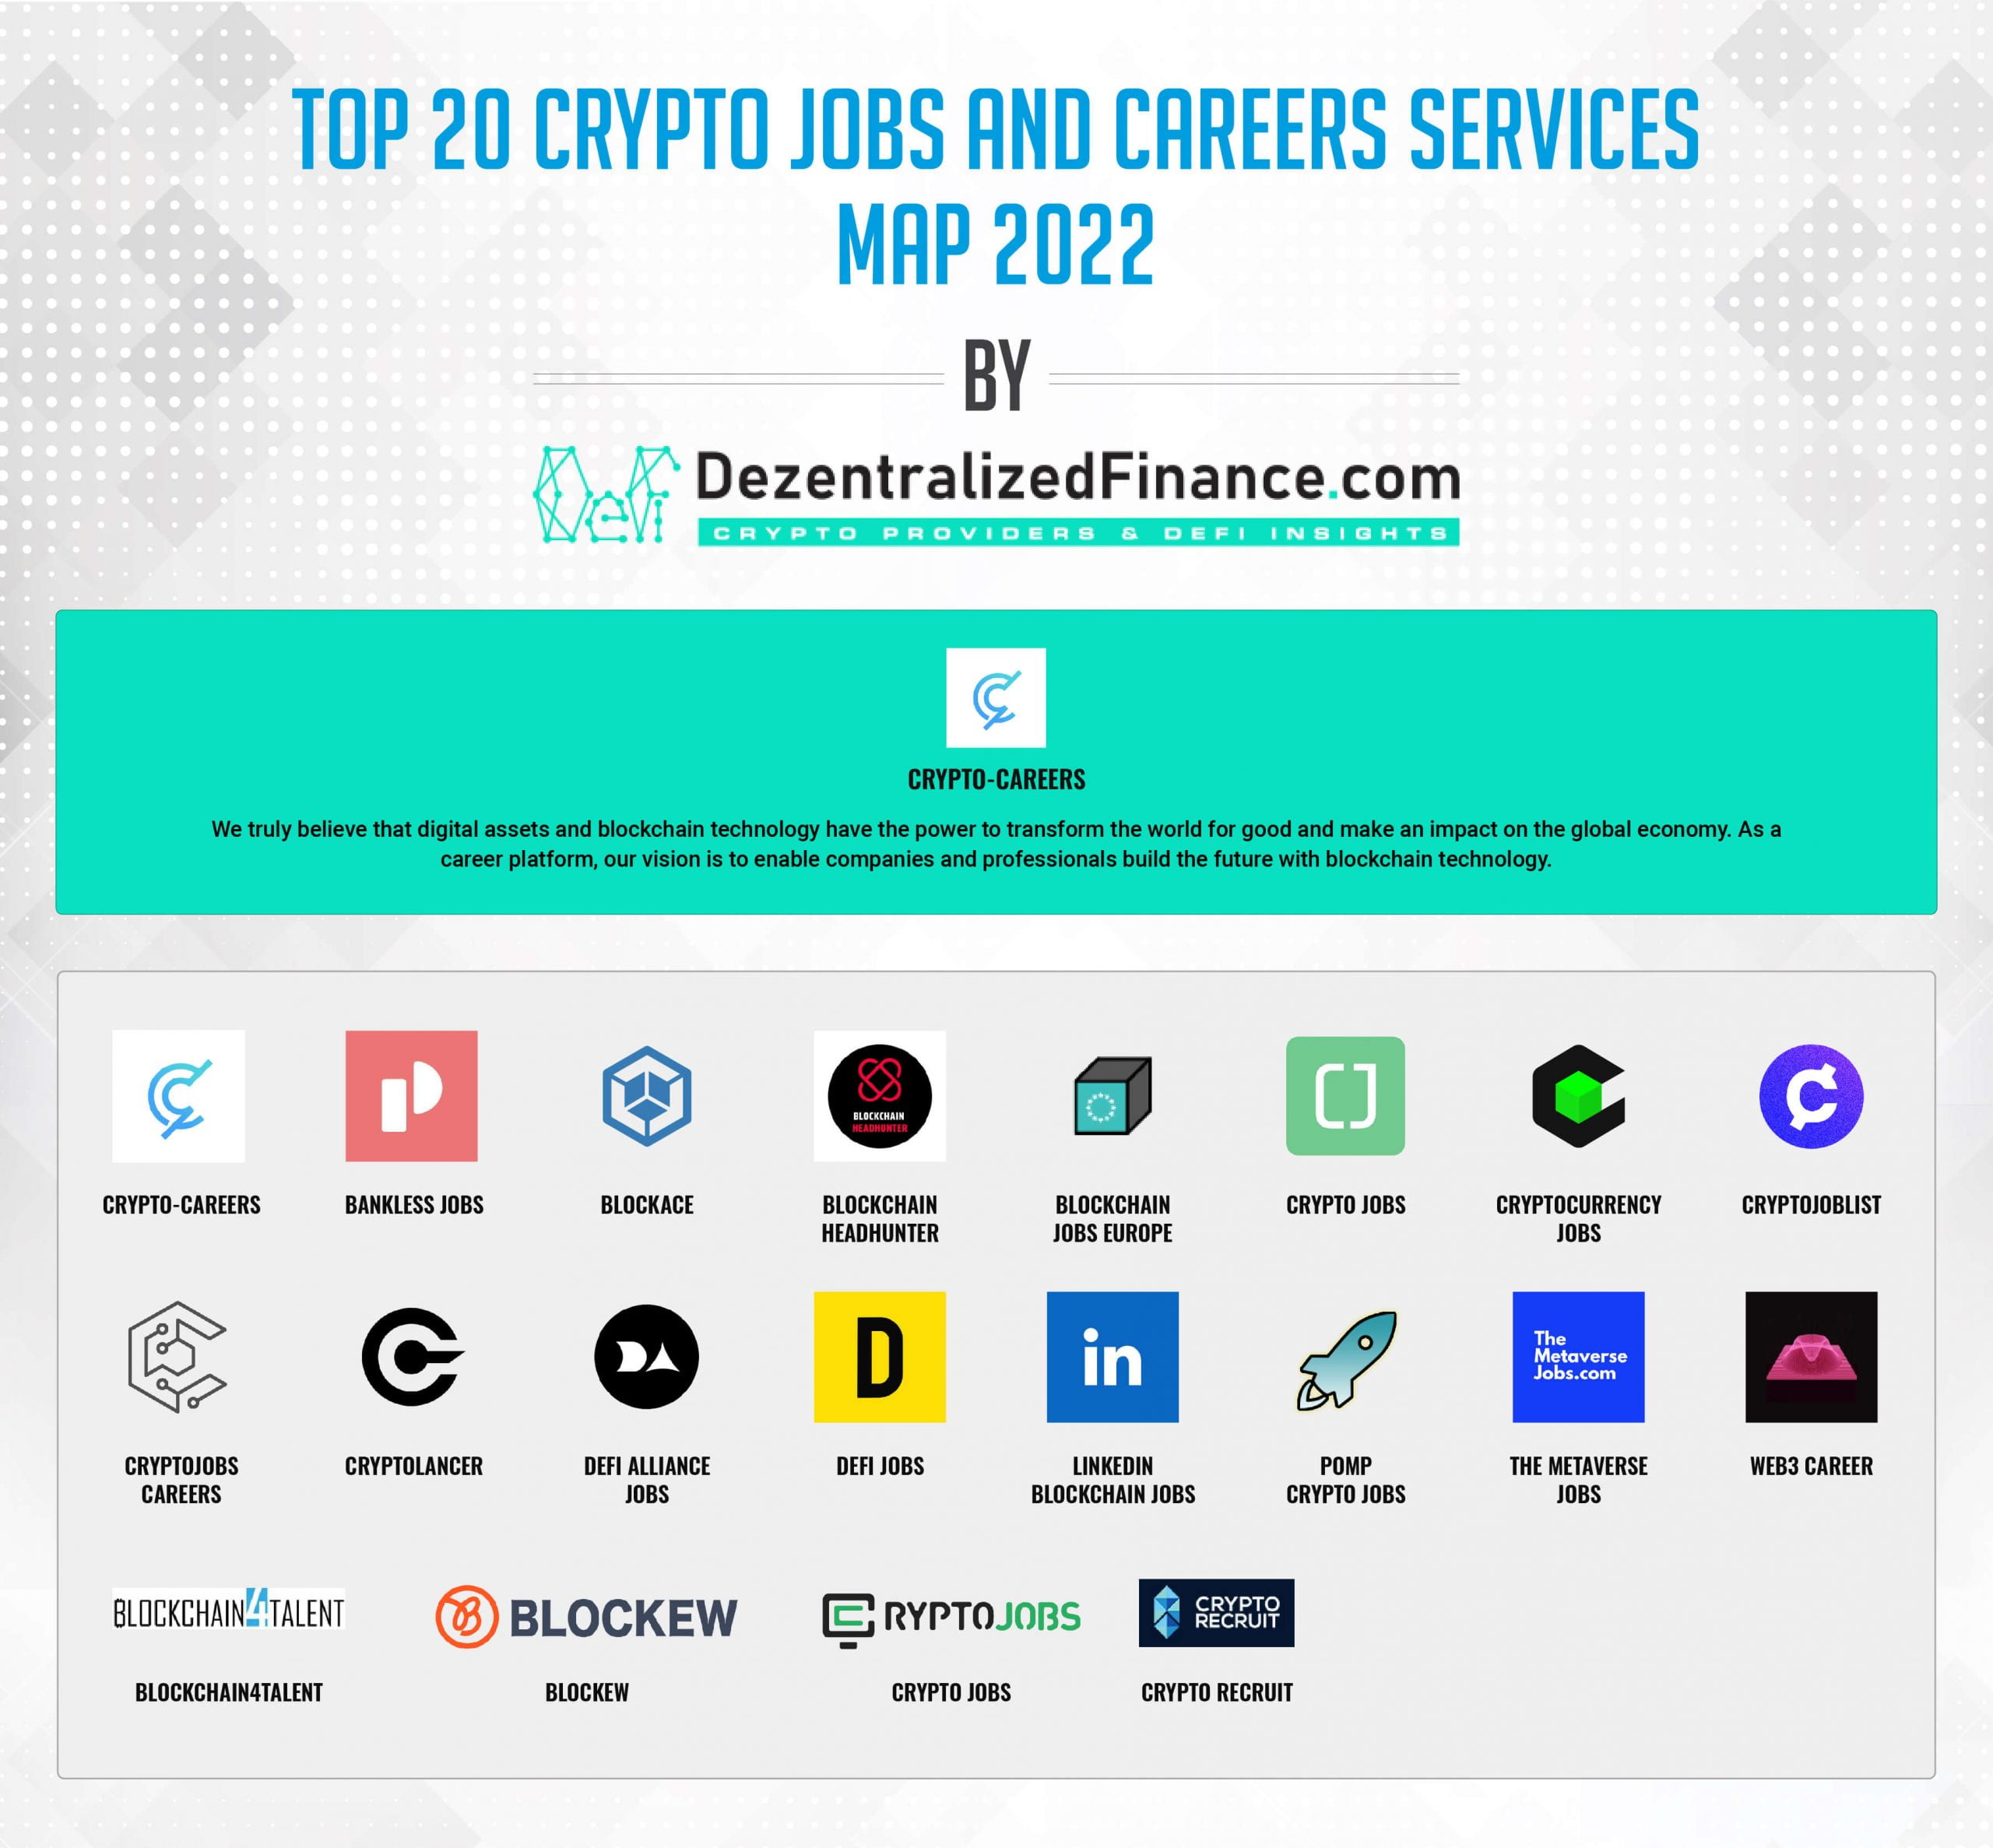 Top 20 Crypto Jobs and Careers Services scaled